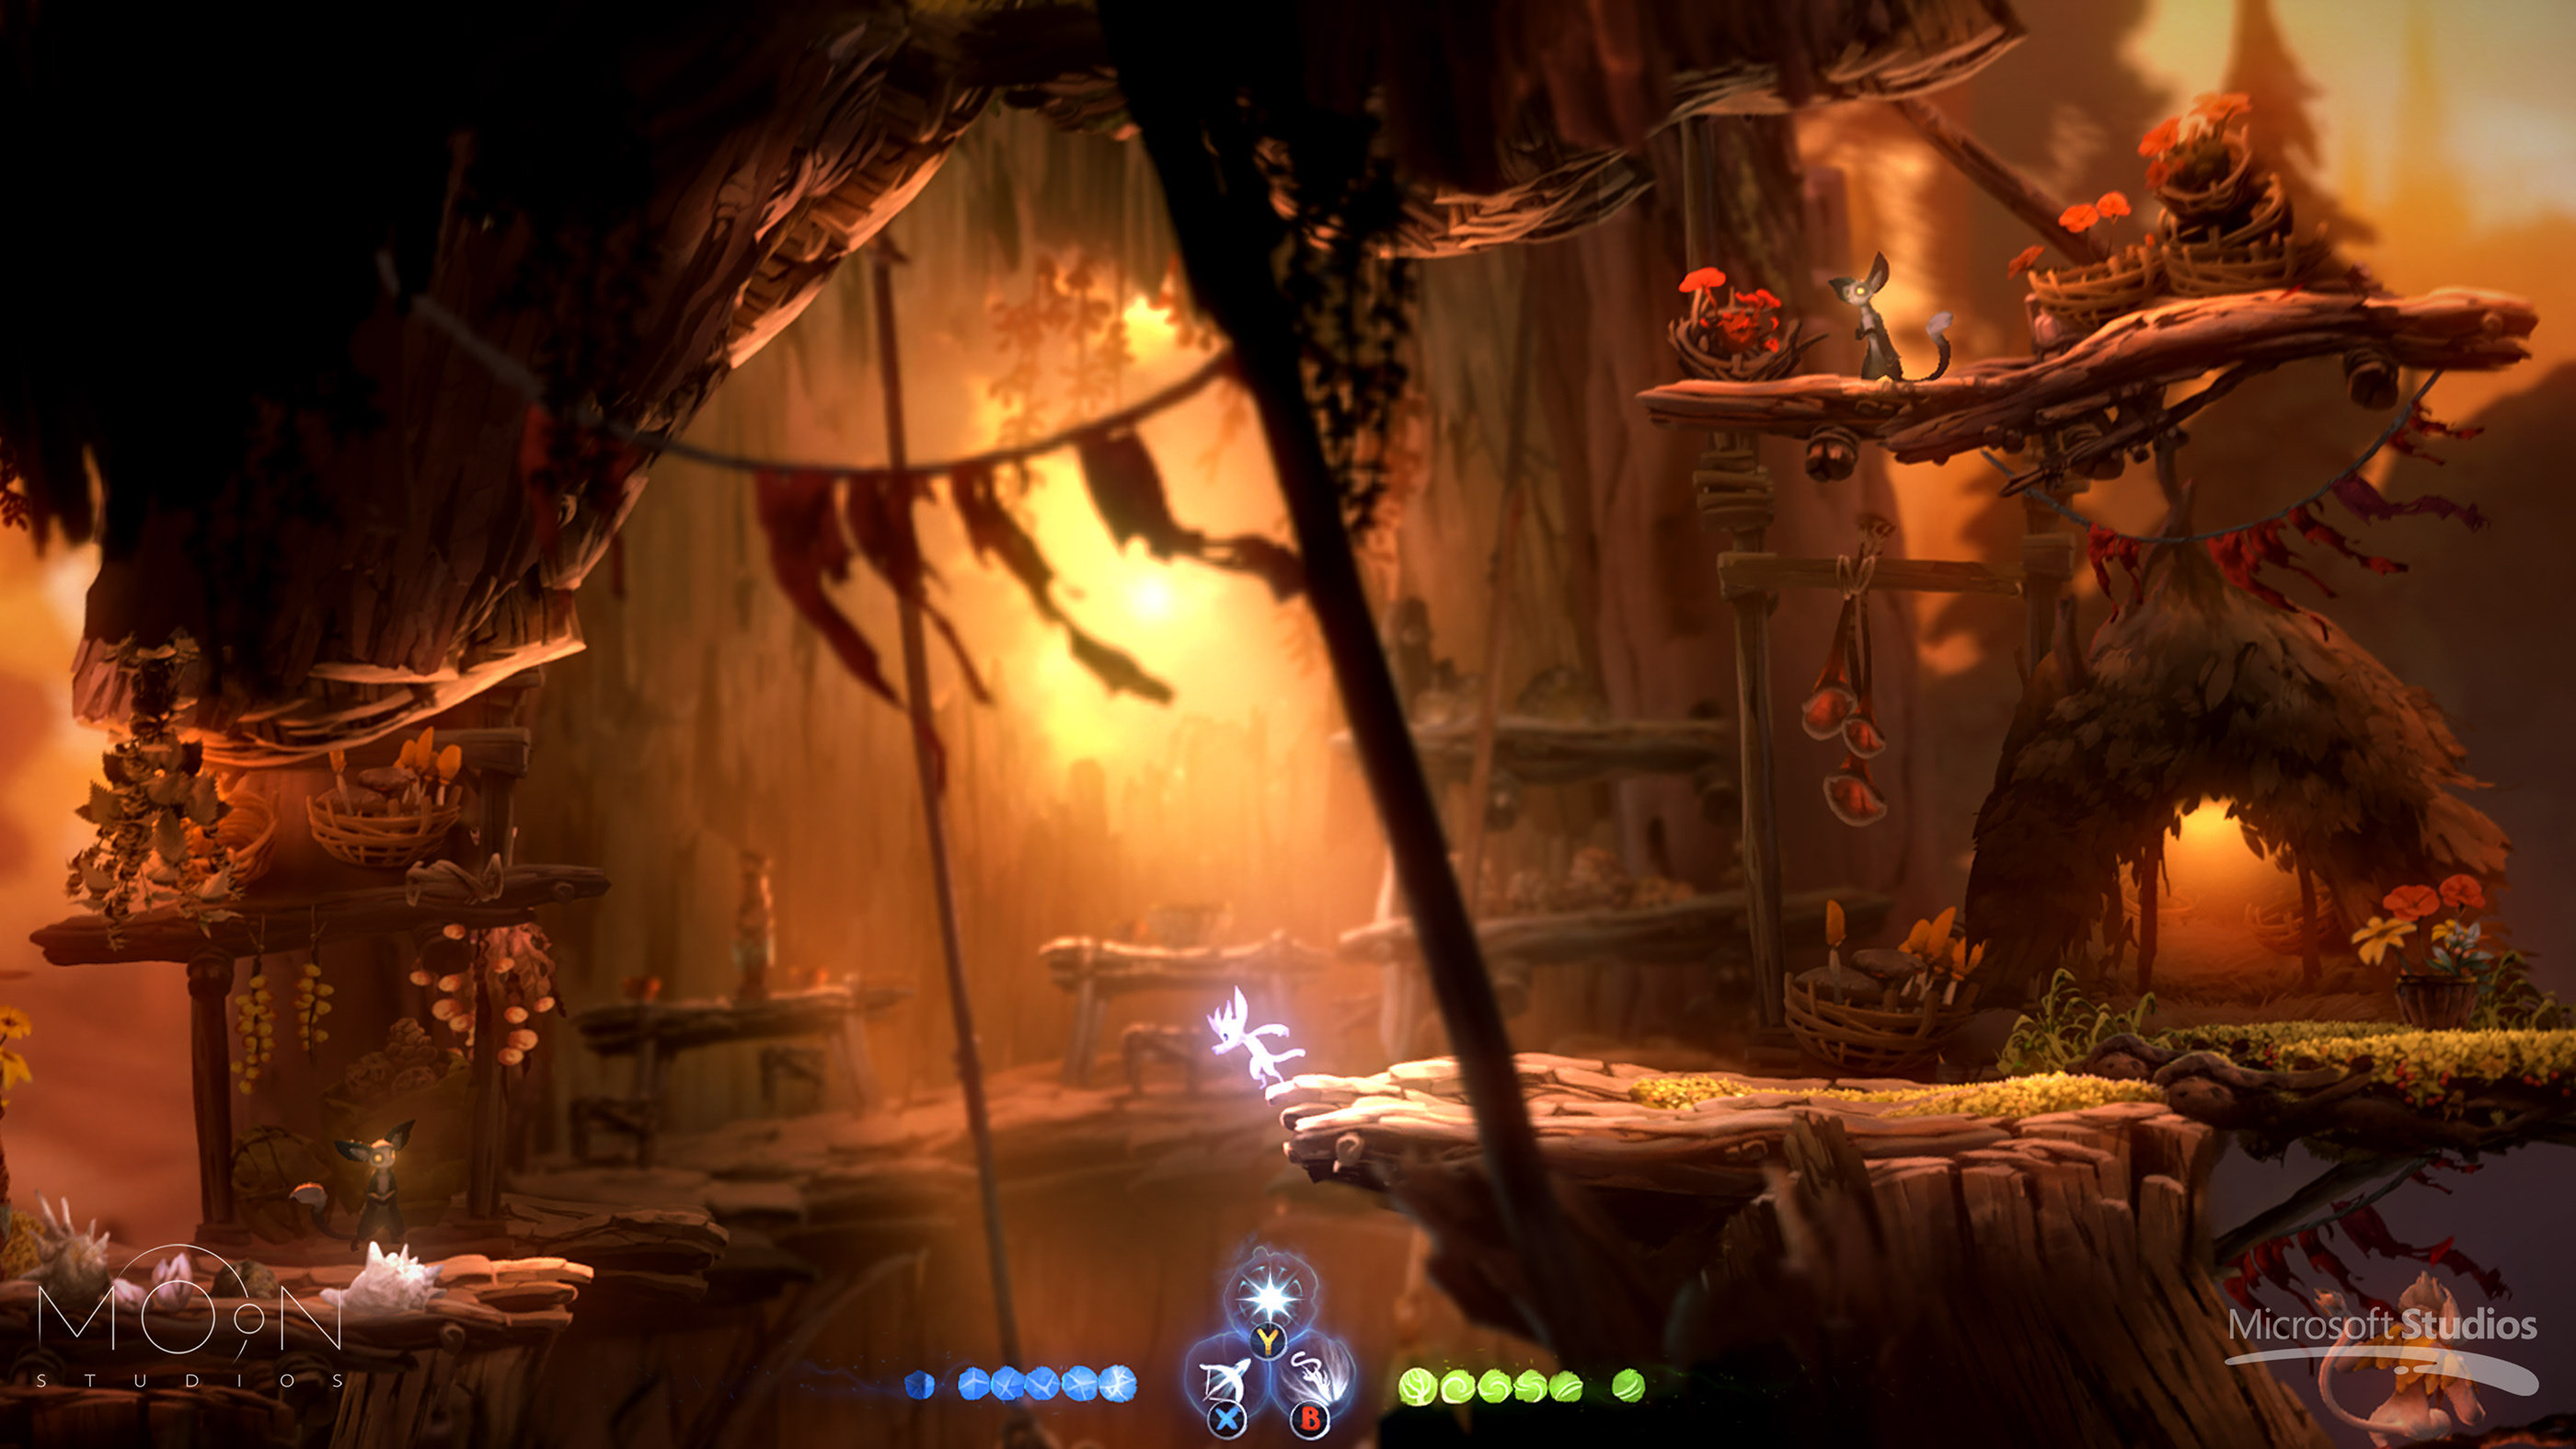 Incredible Game Level Design for Ori and the Will of the Wisps